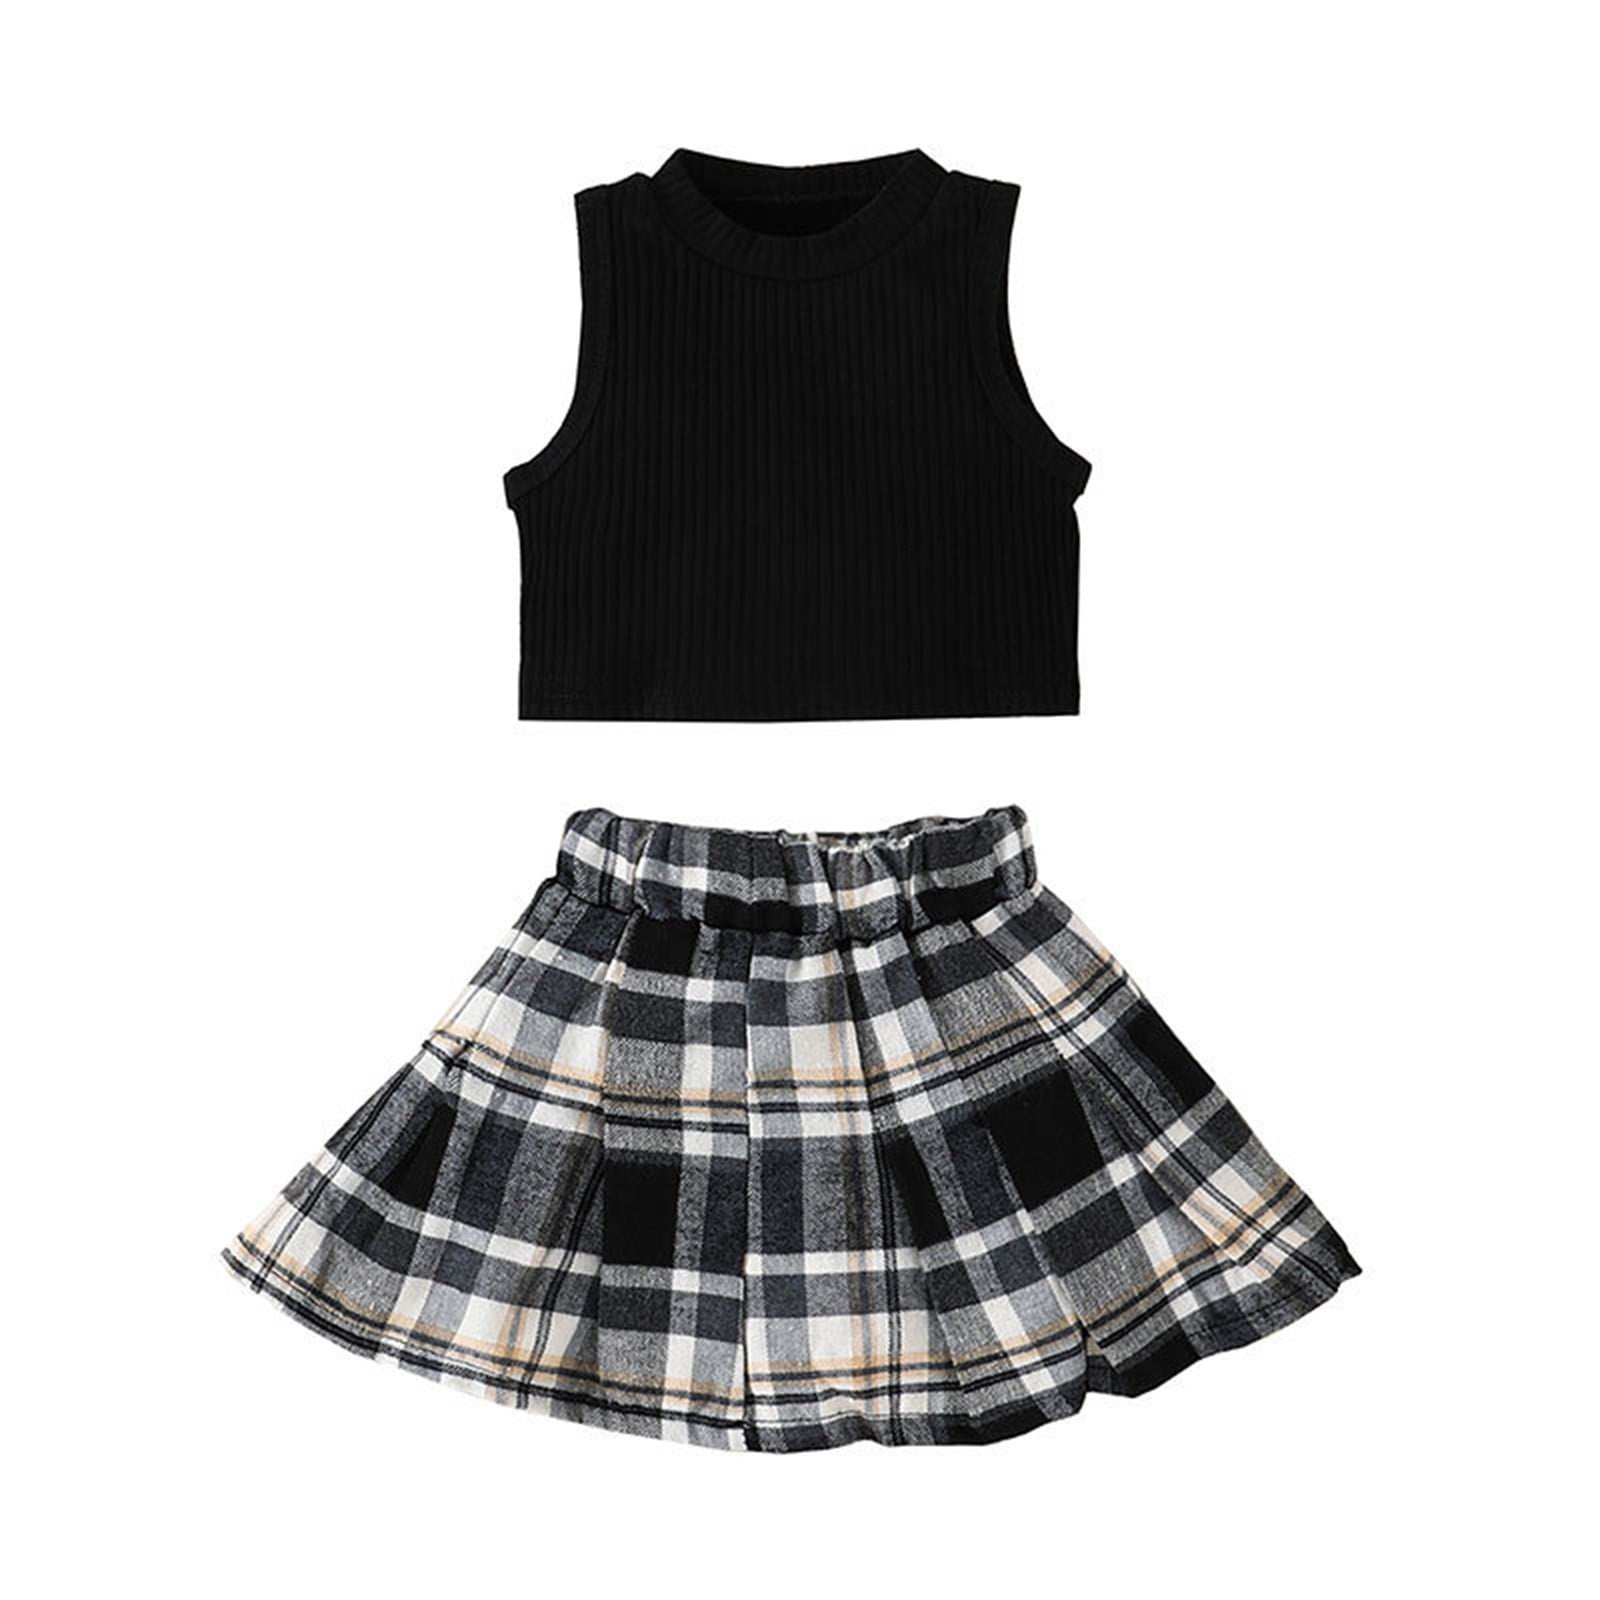 Monogram Girl Outfits Toddler Outfits Girls Summer Sleeveless Tops Plaid  Prints Skirts with Bag (Black, 3-4 Years)